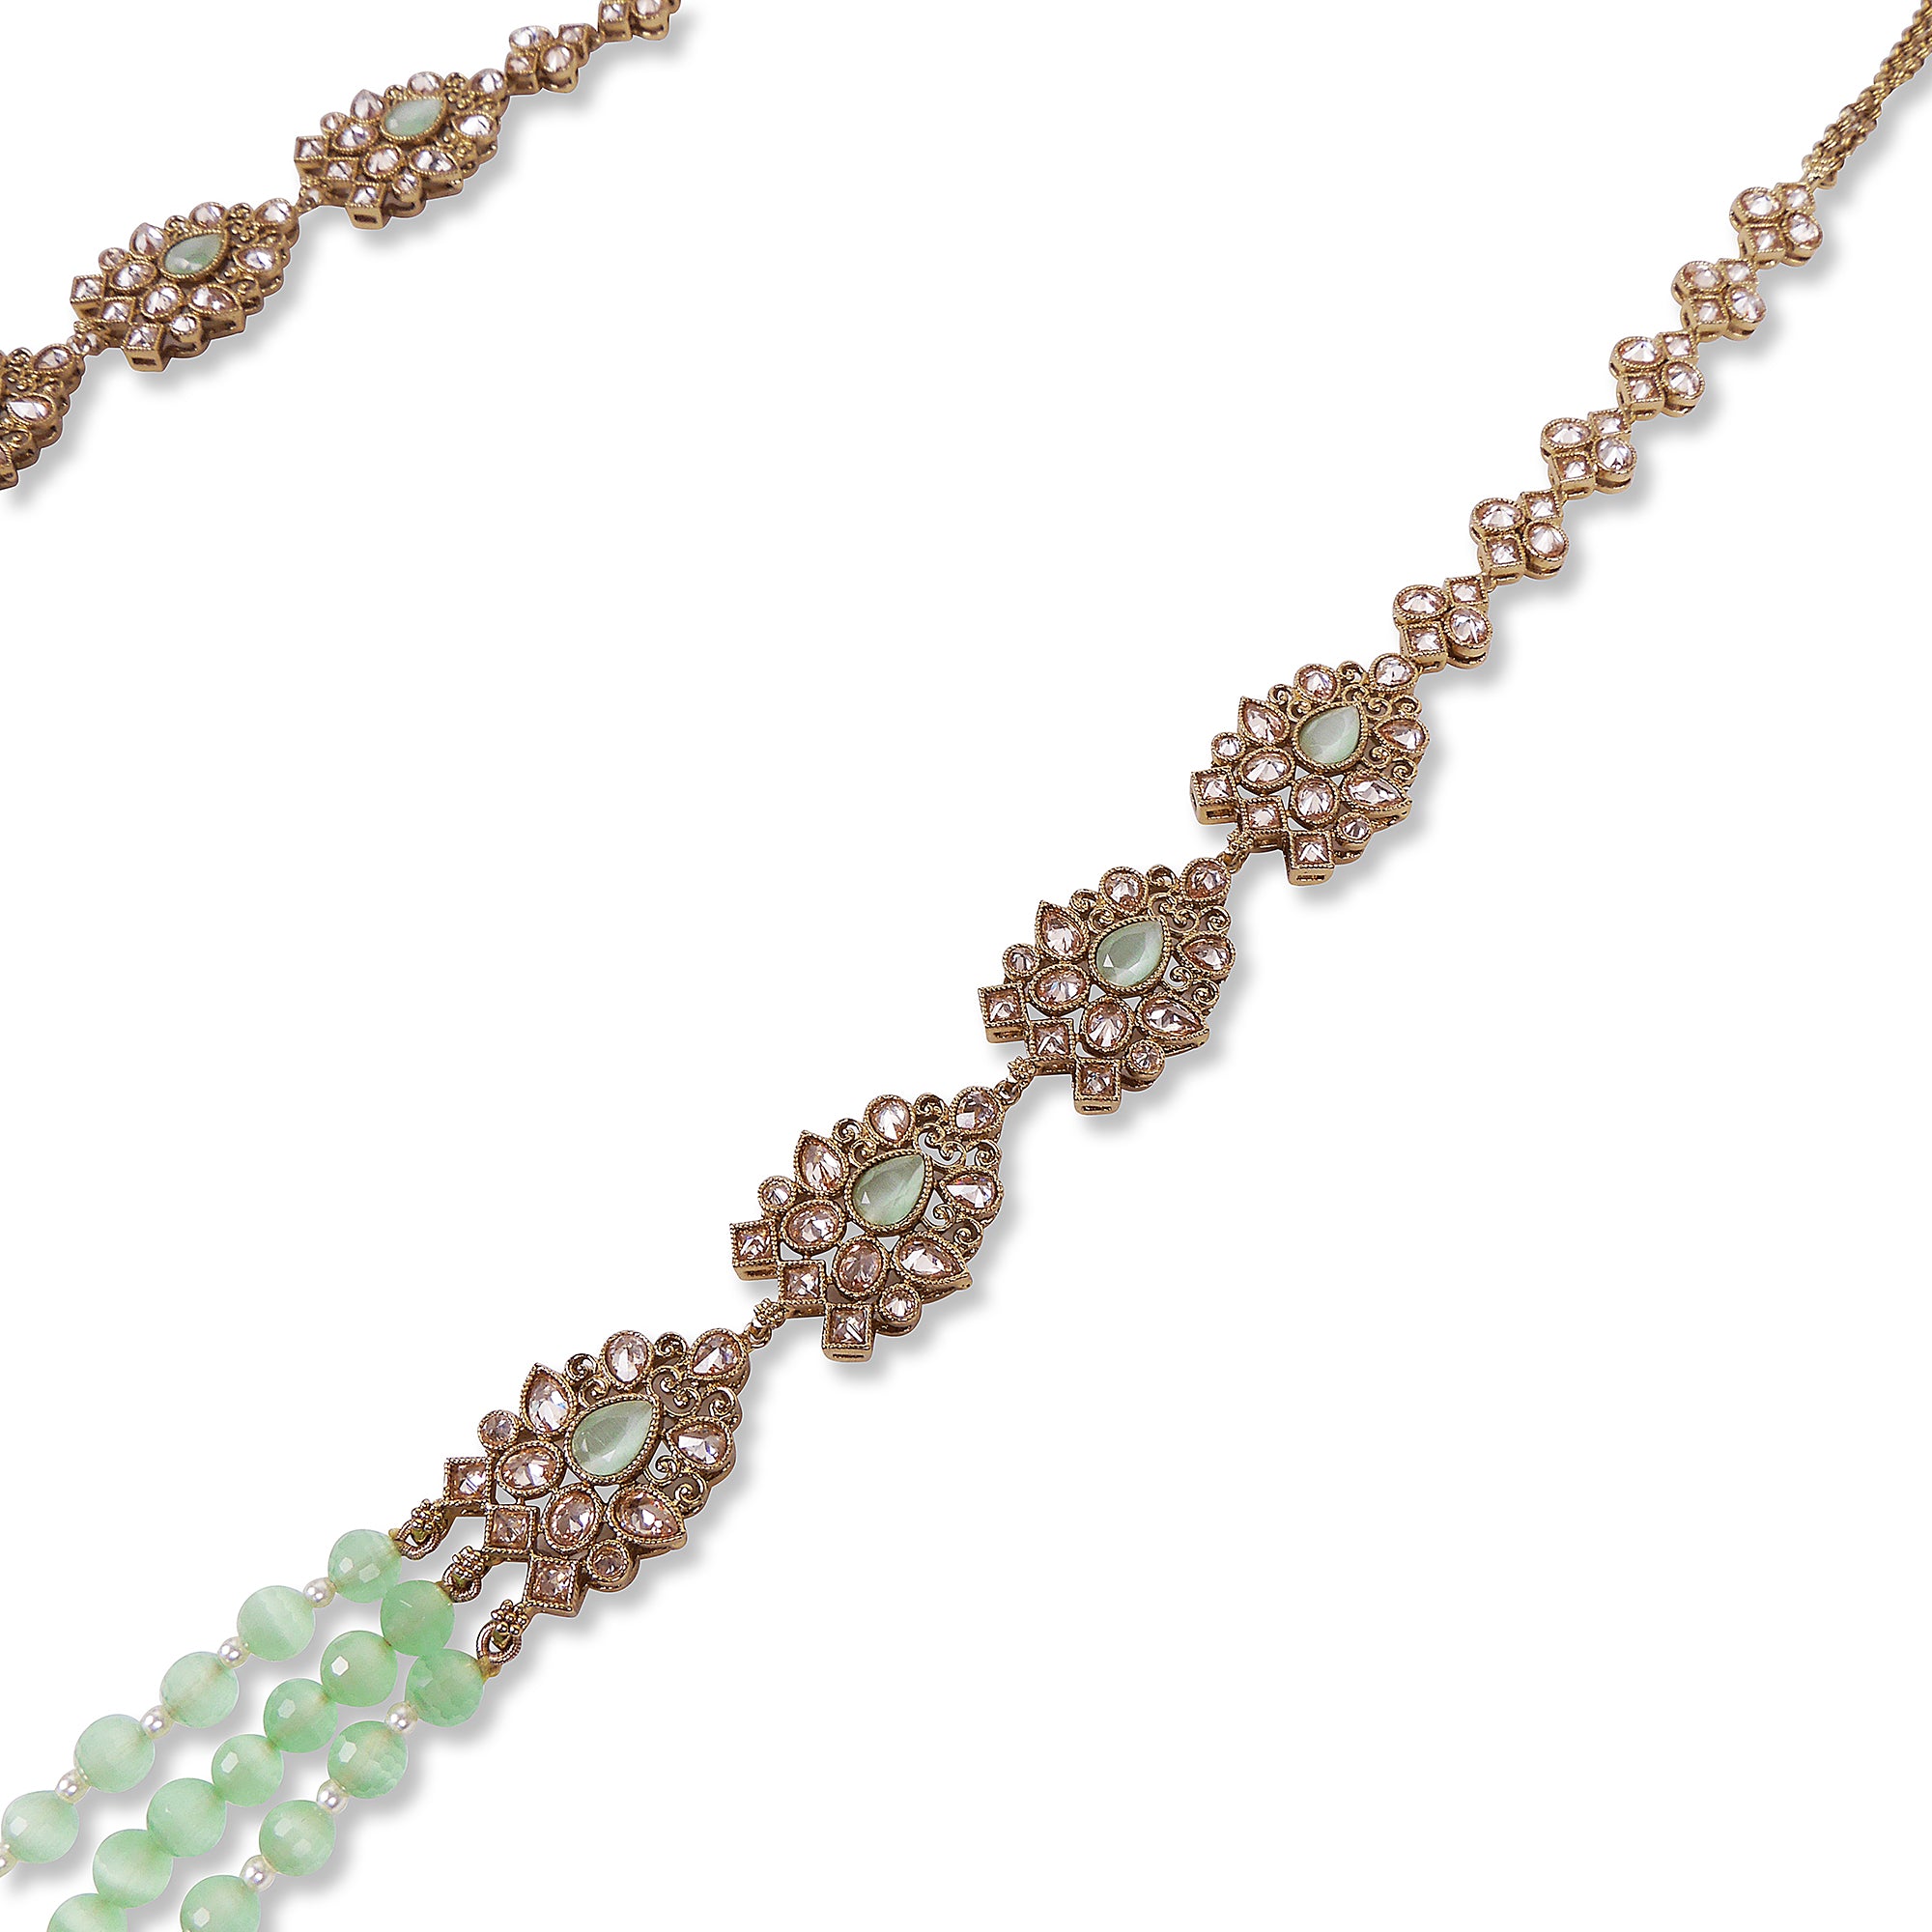 Nihira Layered Long Necklace in Mint and Antique Gold